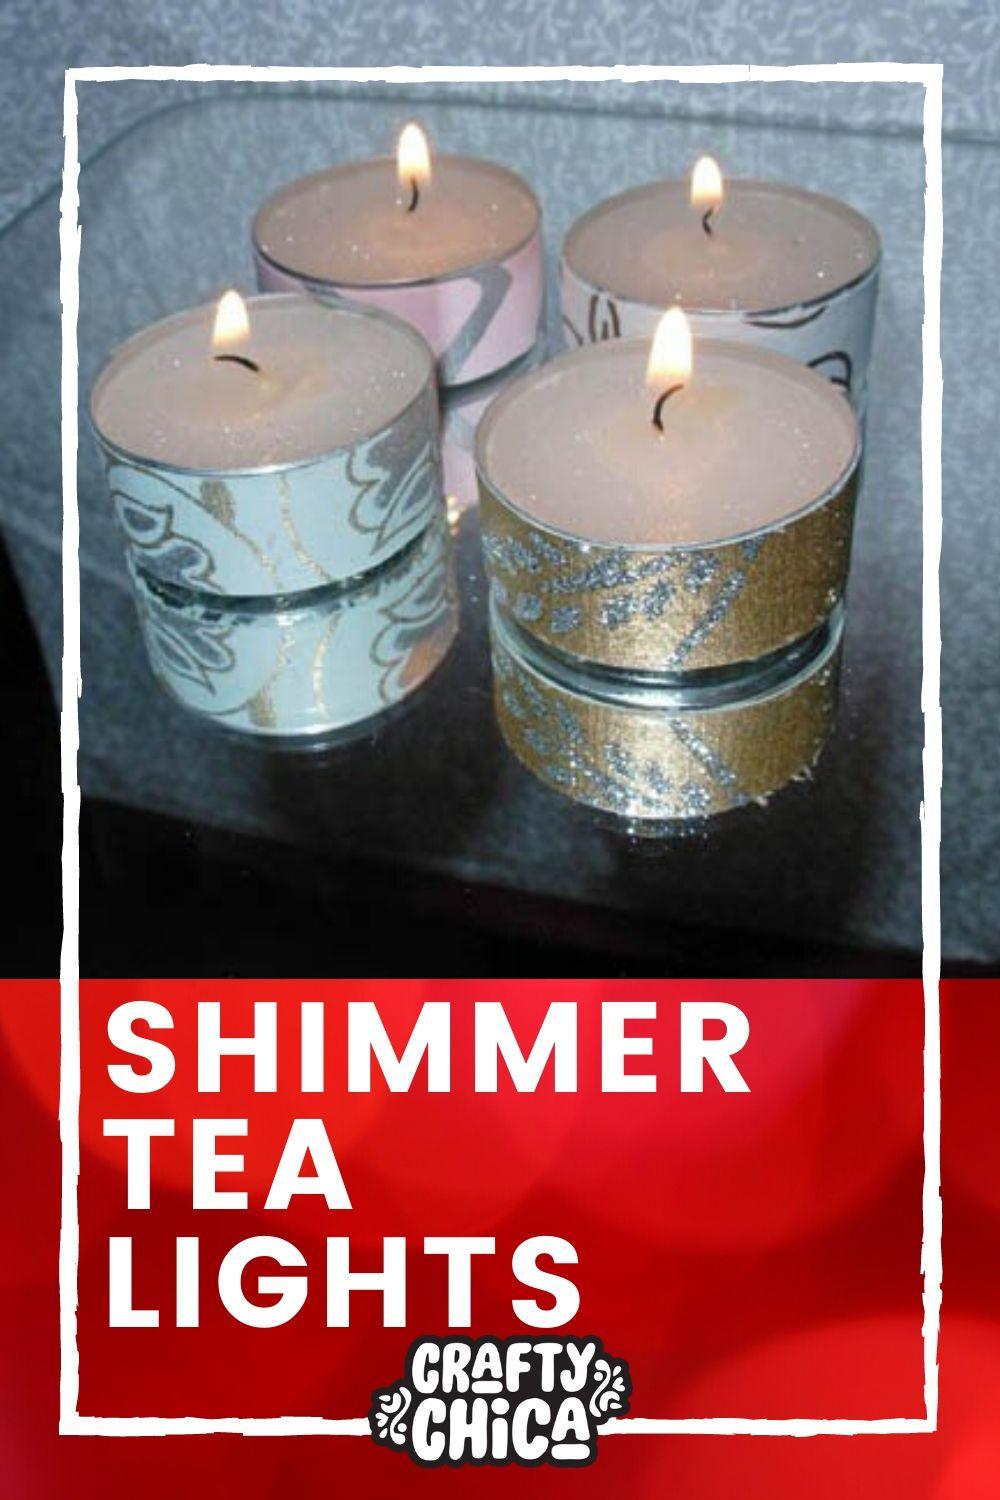 How to make shimmer tea lights #craftychica